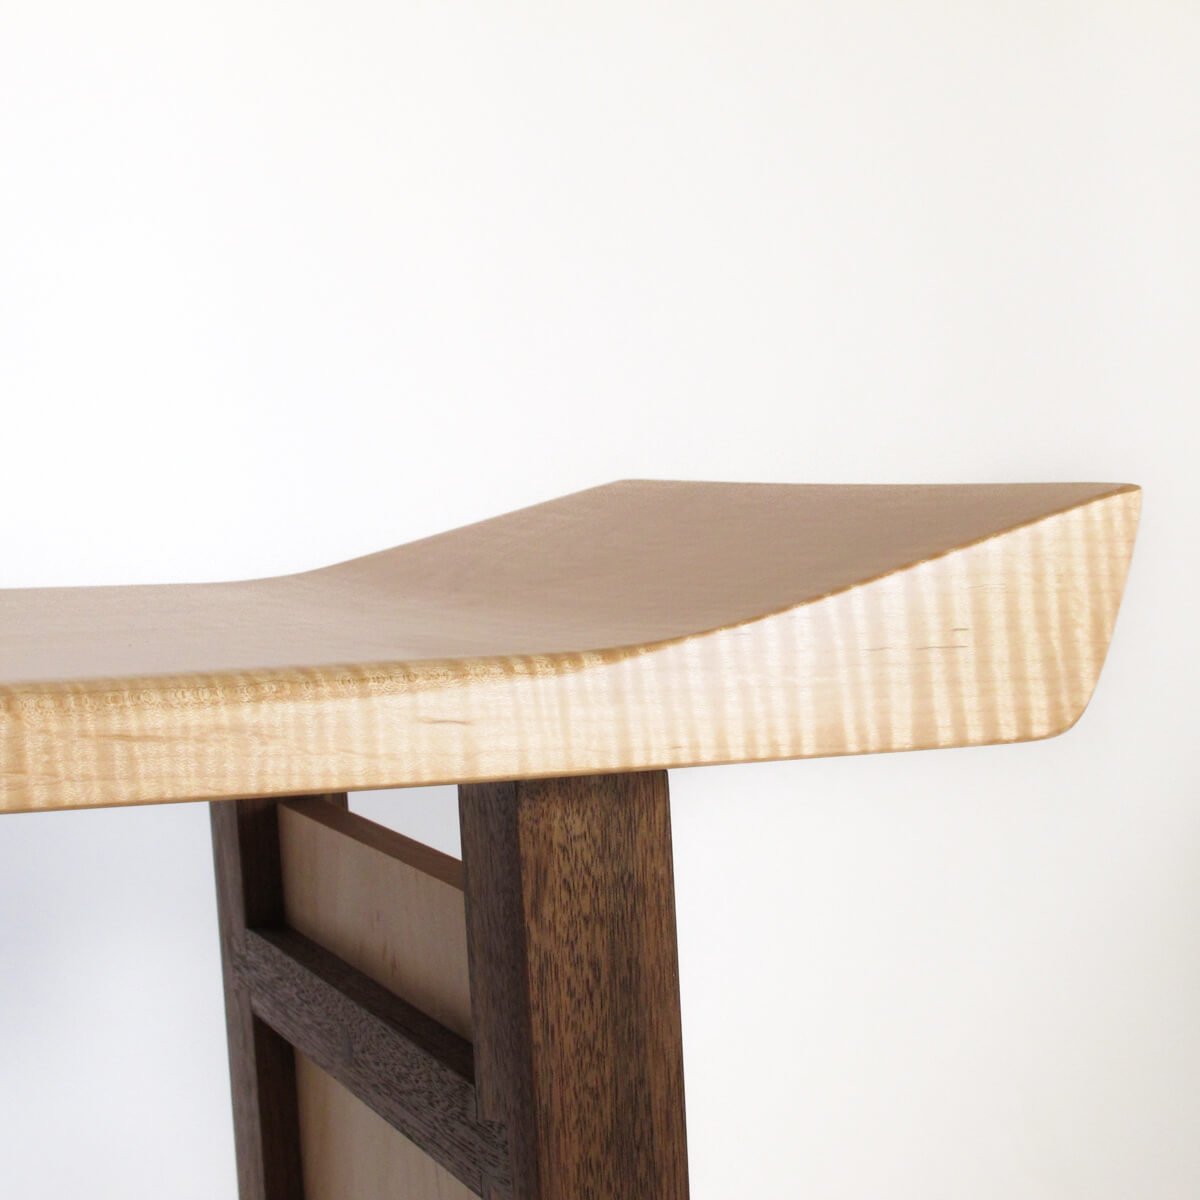 fine finish on wooden entryway bench by Mokuzai Furniture